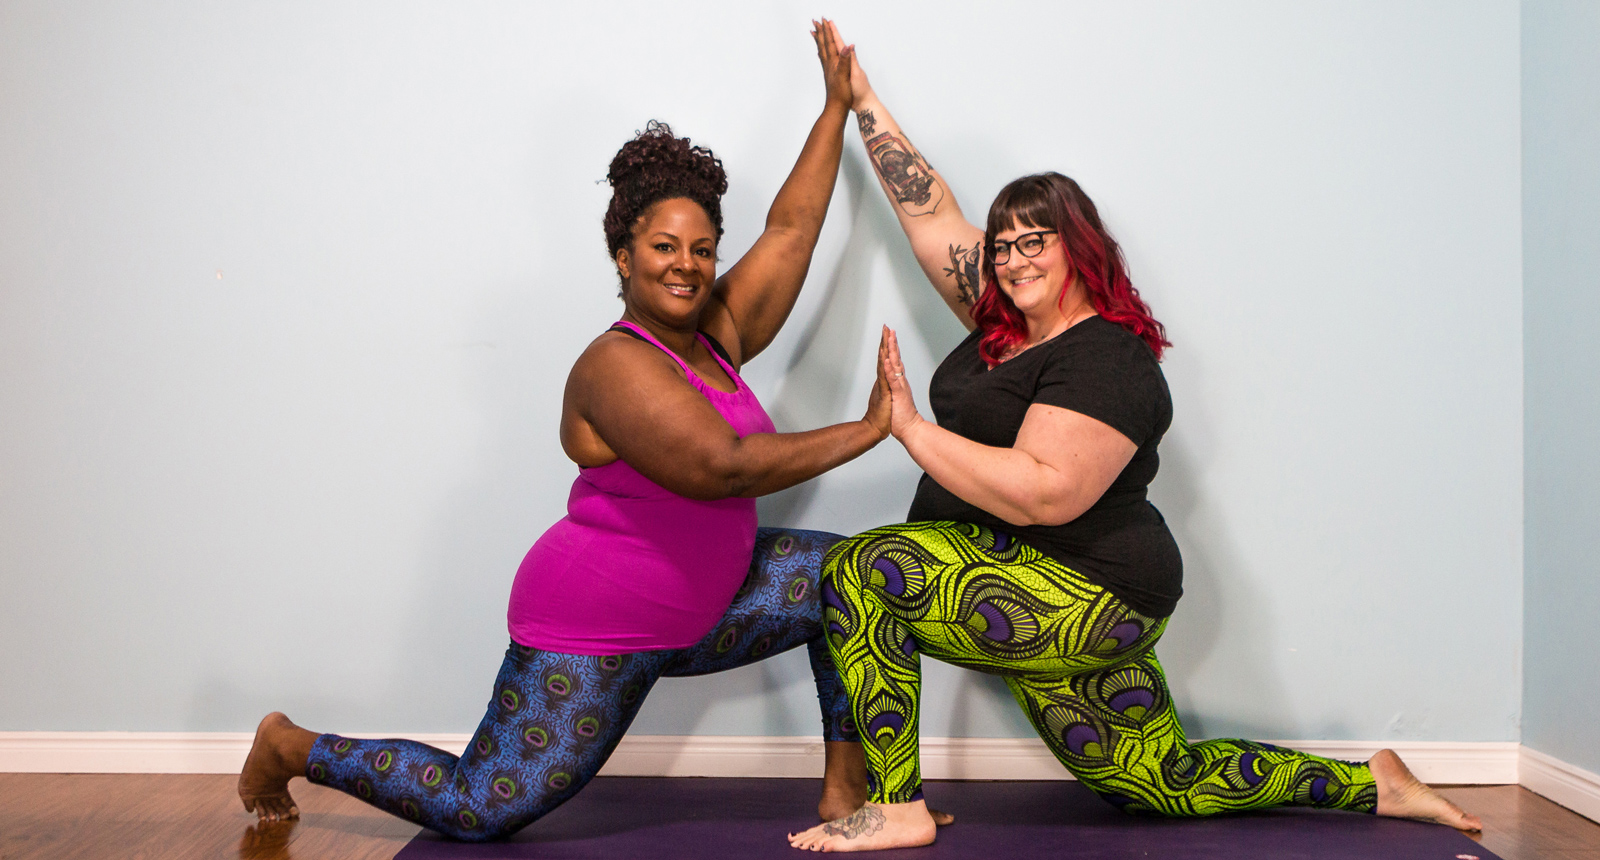 Yoga For All: Creating Body Positive Yoga Classes for All Shapes, Sizes & Abilities